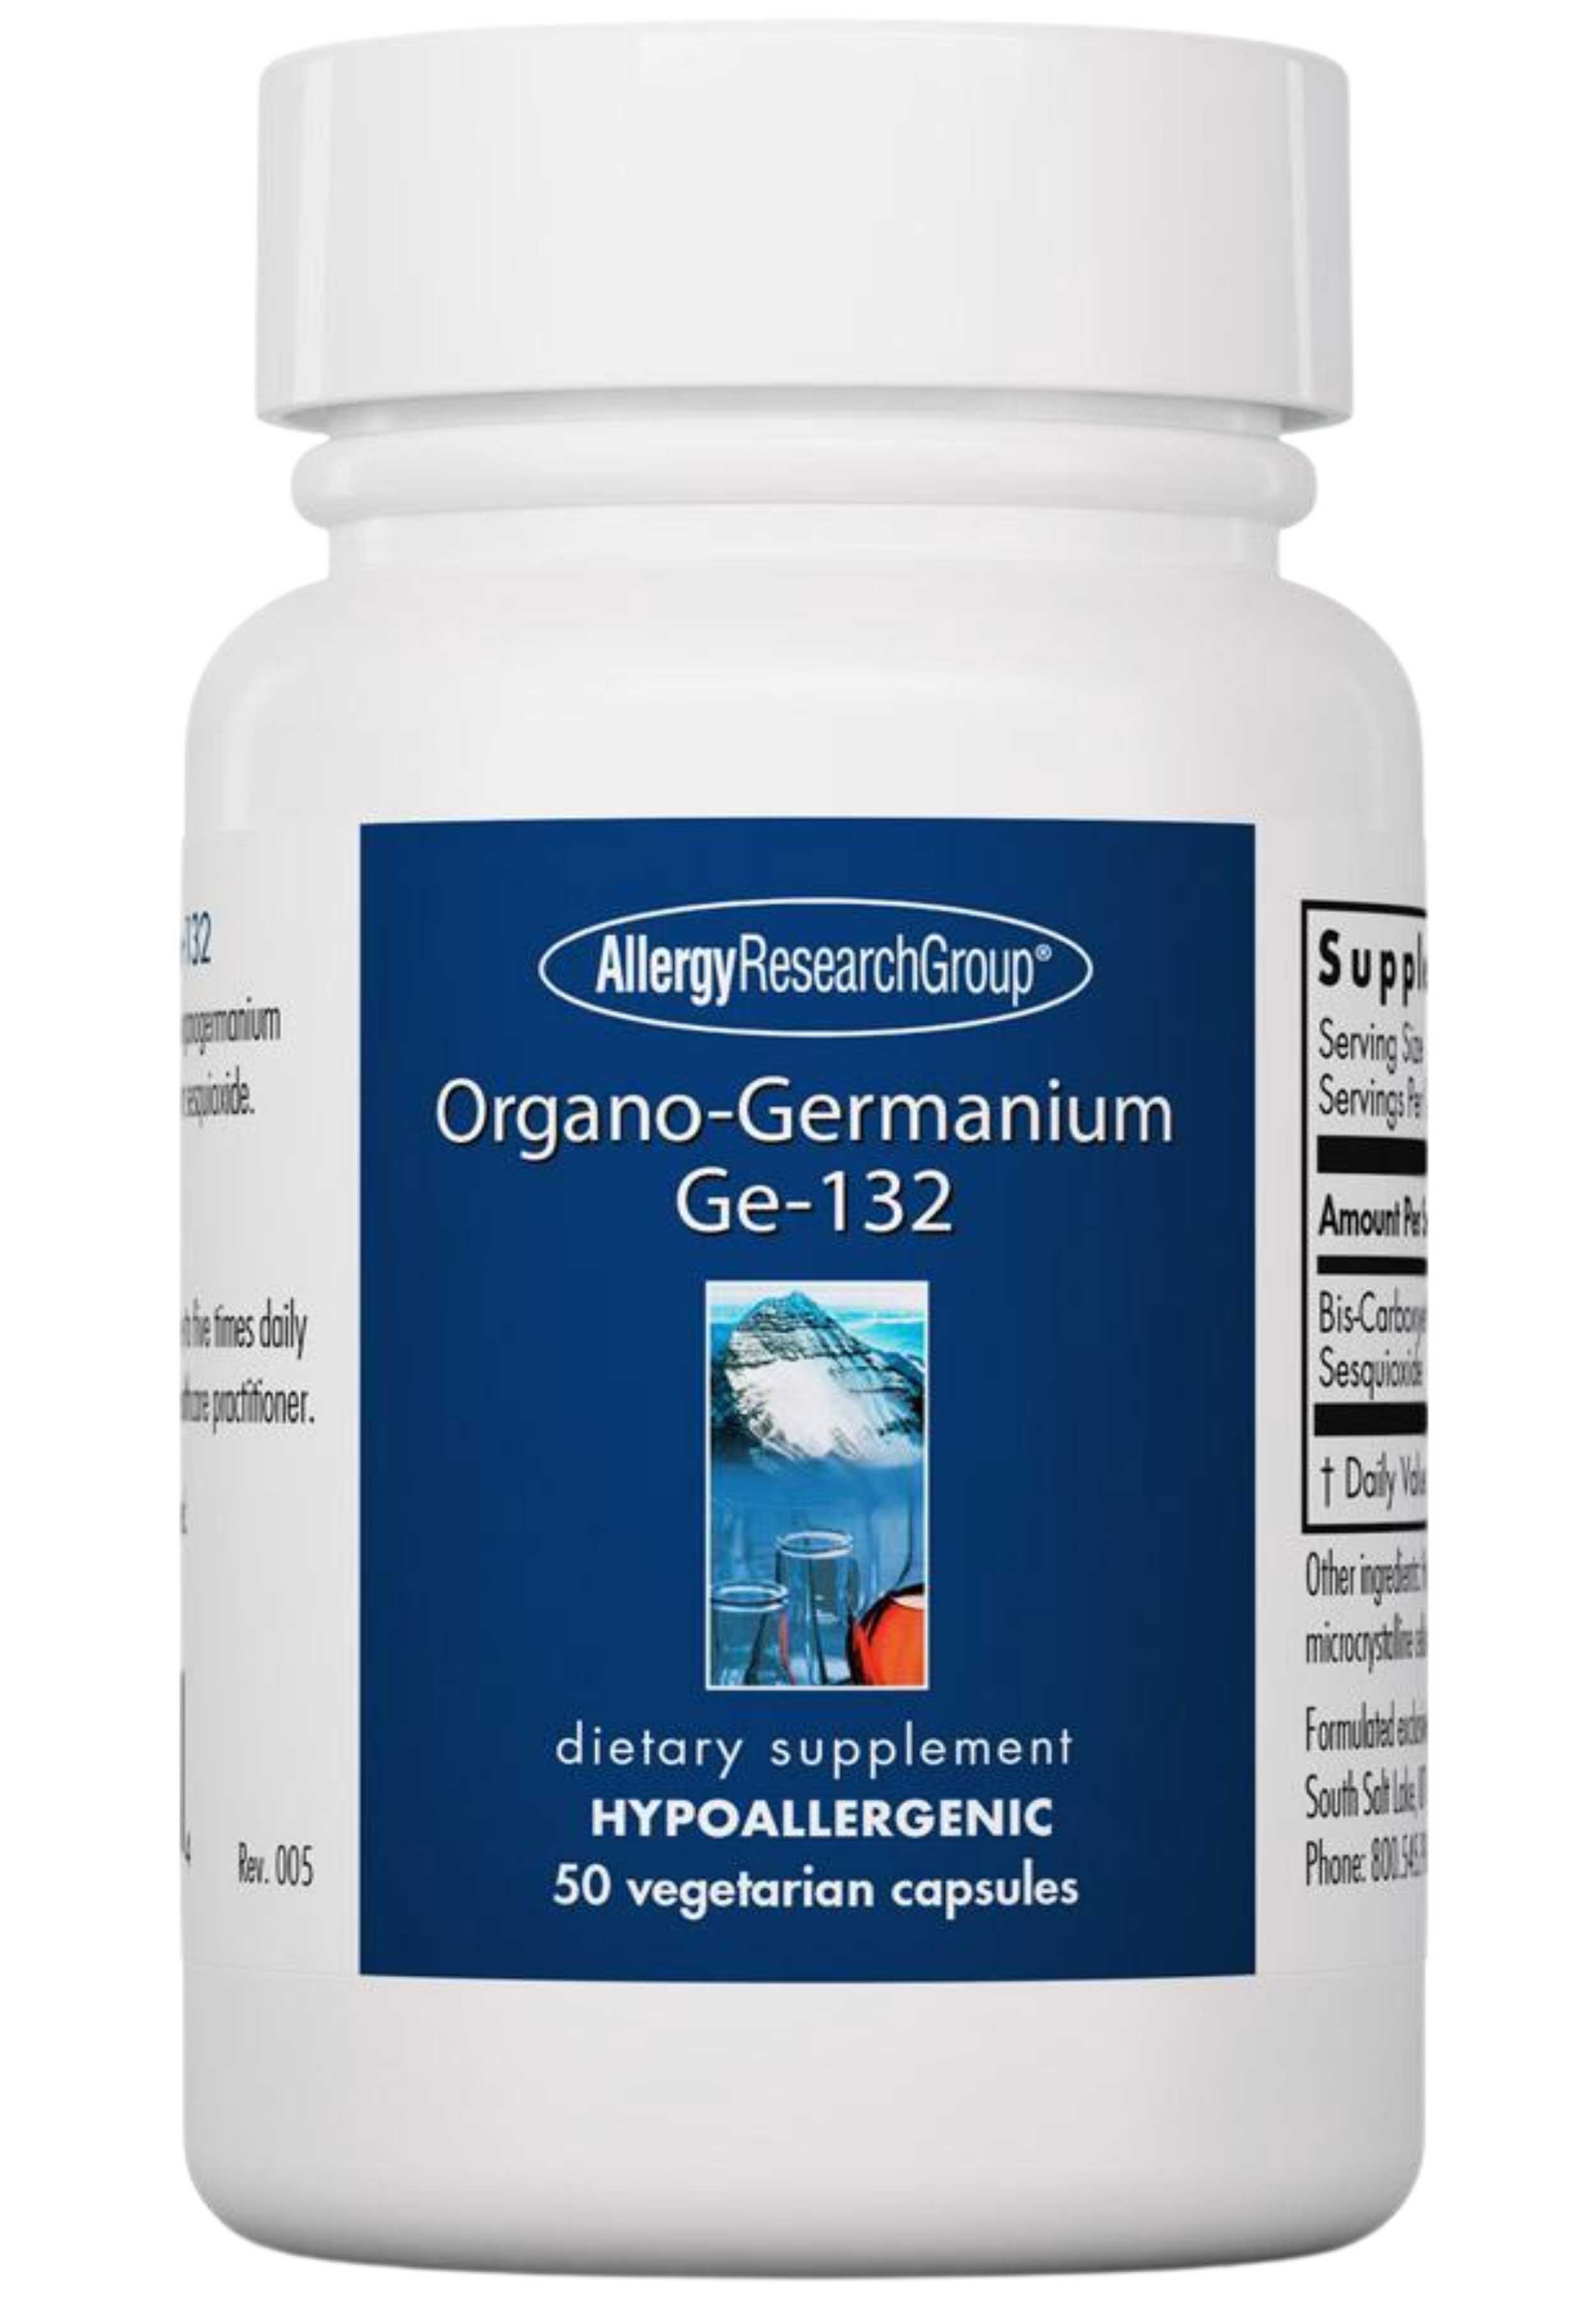 Allergy Research Group Organo-Germanium Ge-132